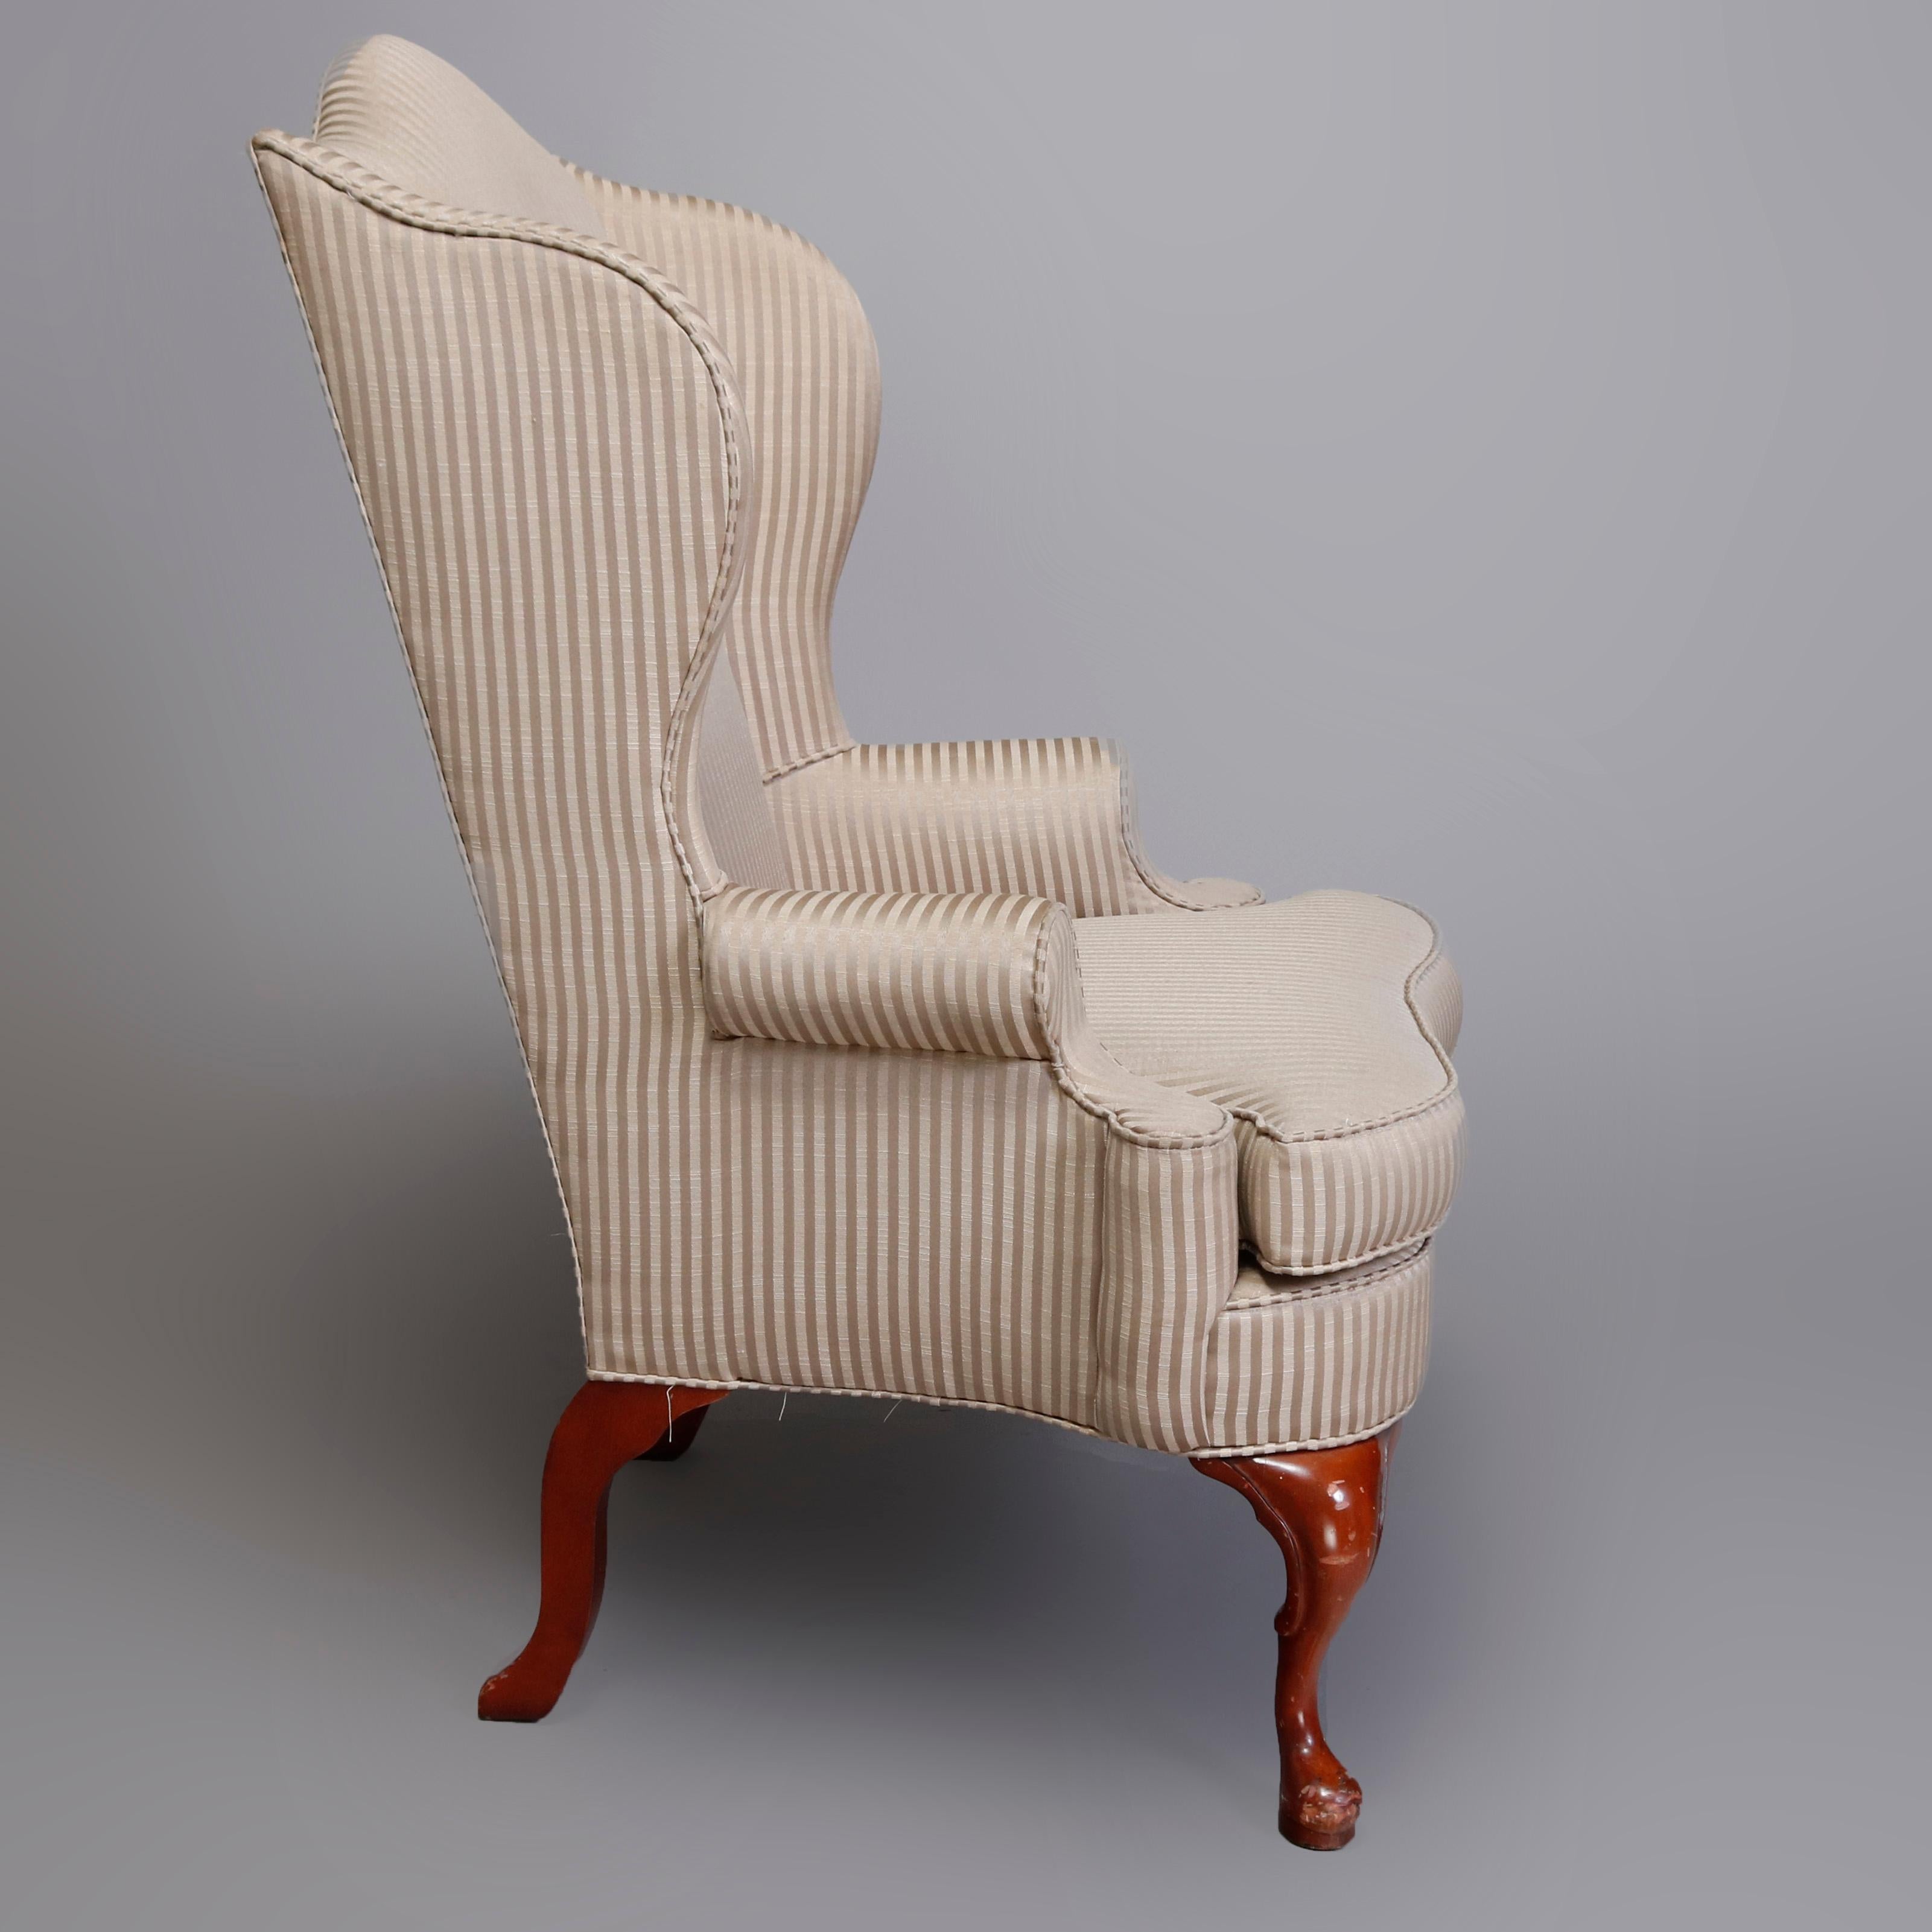 20th Century Pair of Queen Anne Style Fireside Wingback Chairs, Striped Upholstery